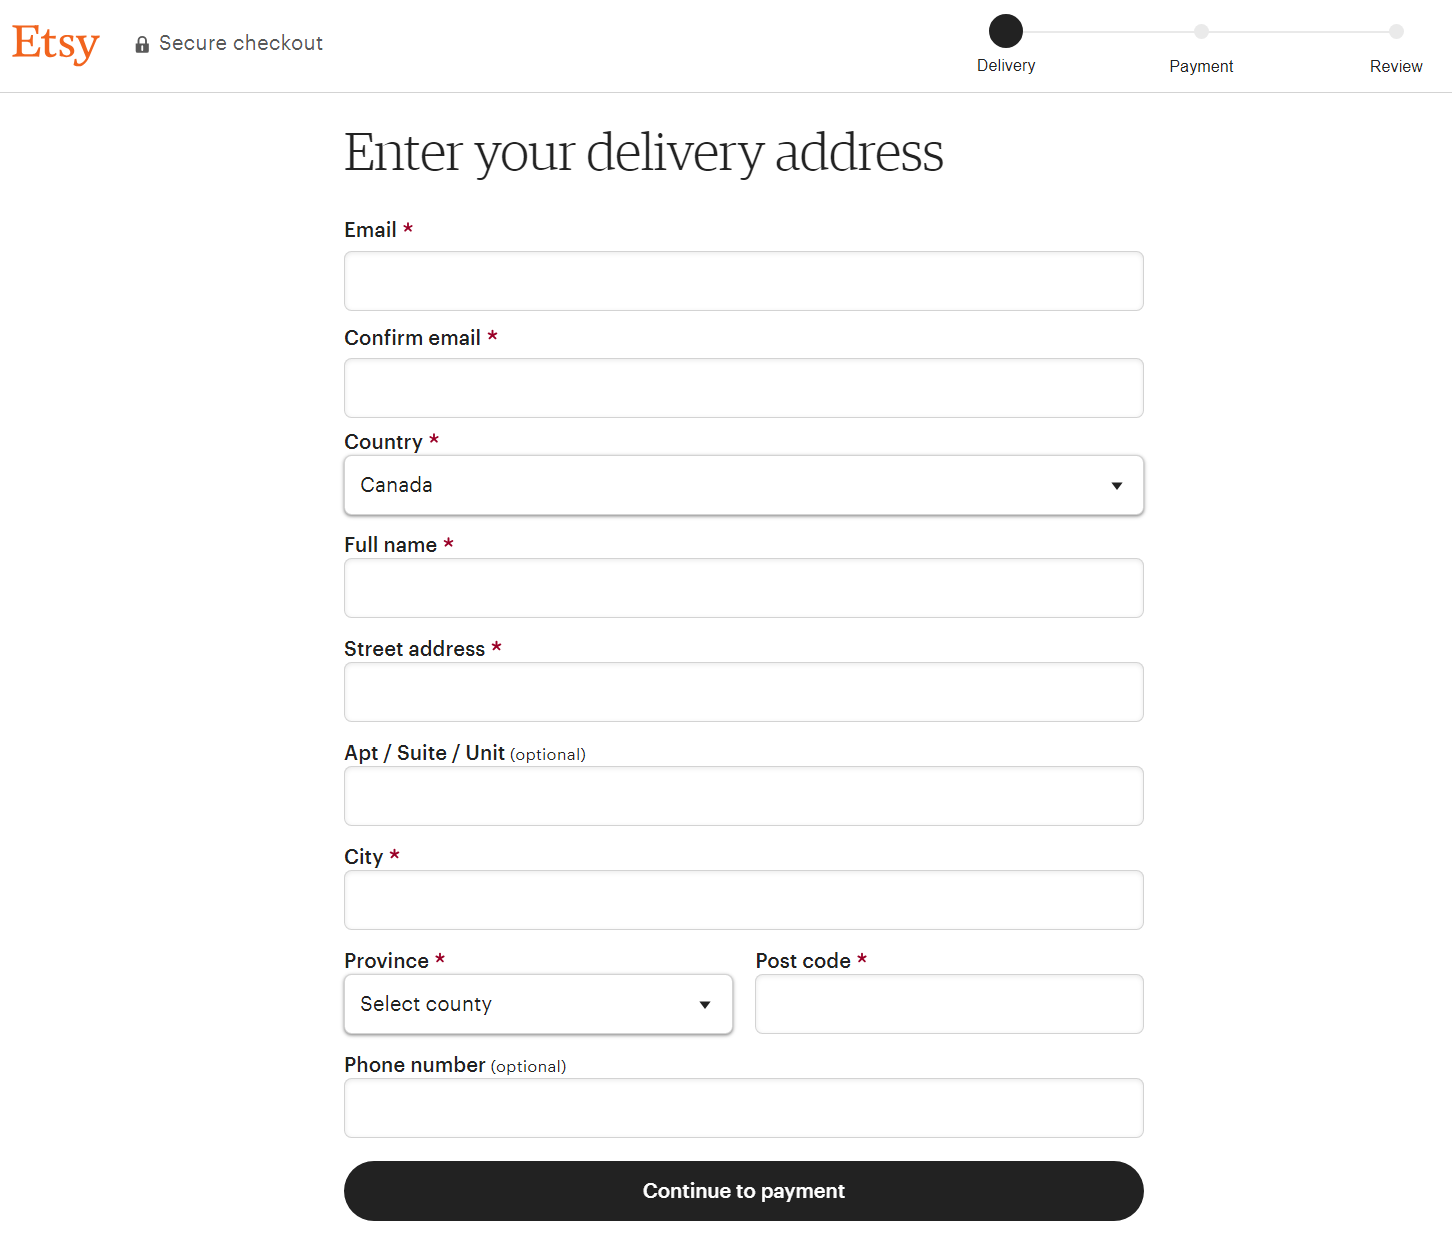 Etsy checkout form for customer delivery details